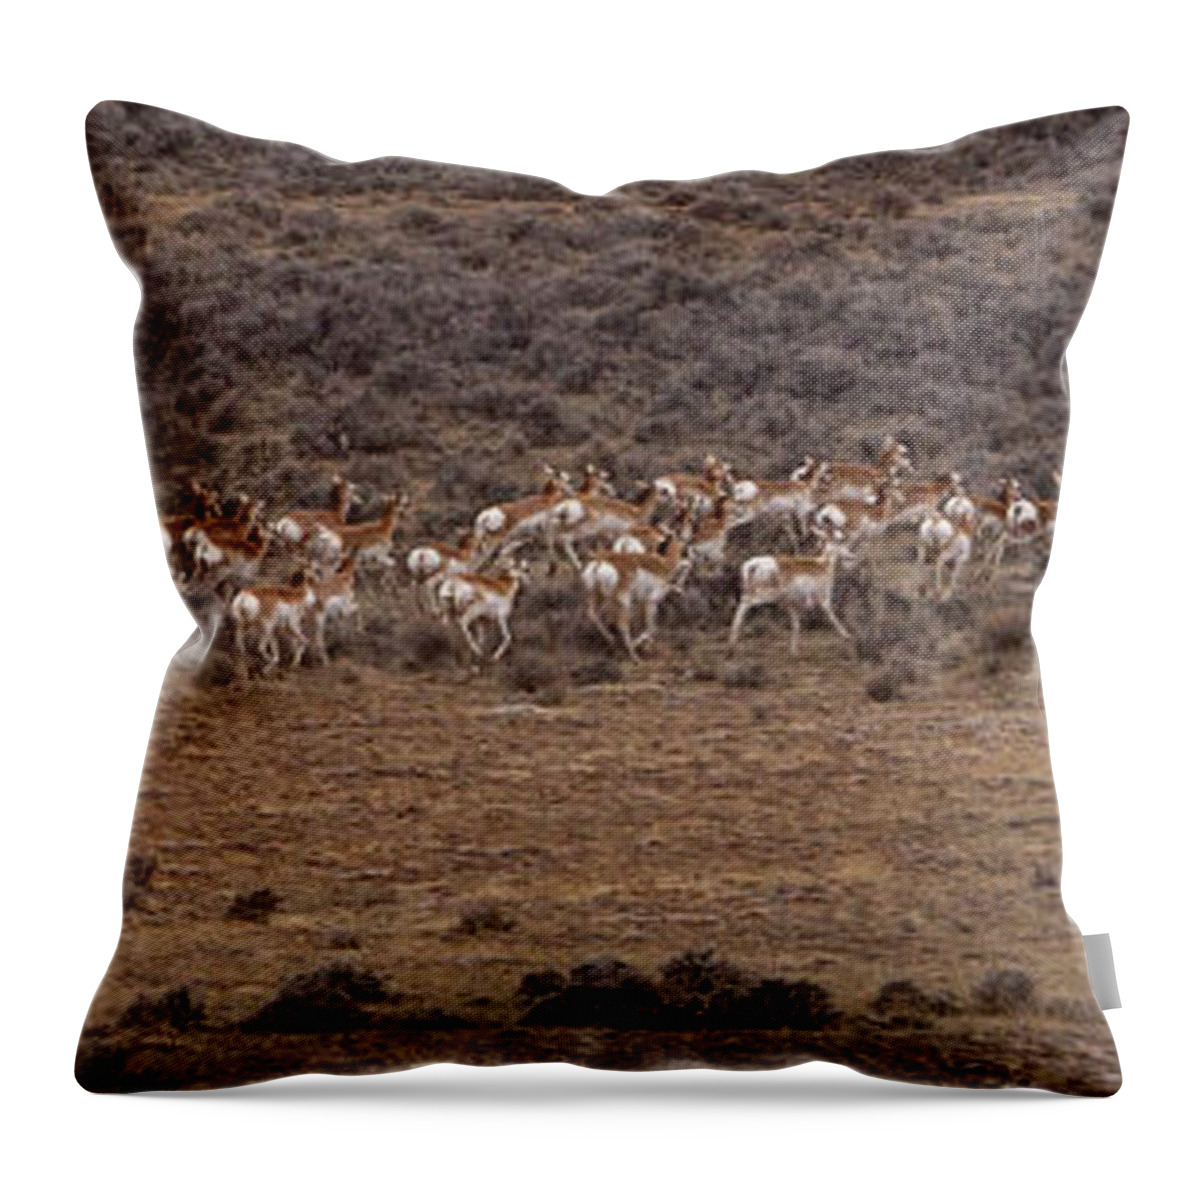 Antilocapra Americana Throw Pillow featuring the photograph Herd Of Antelope  #8552 by J L Woody Wooden